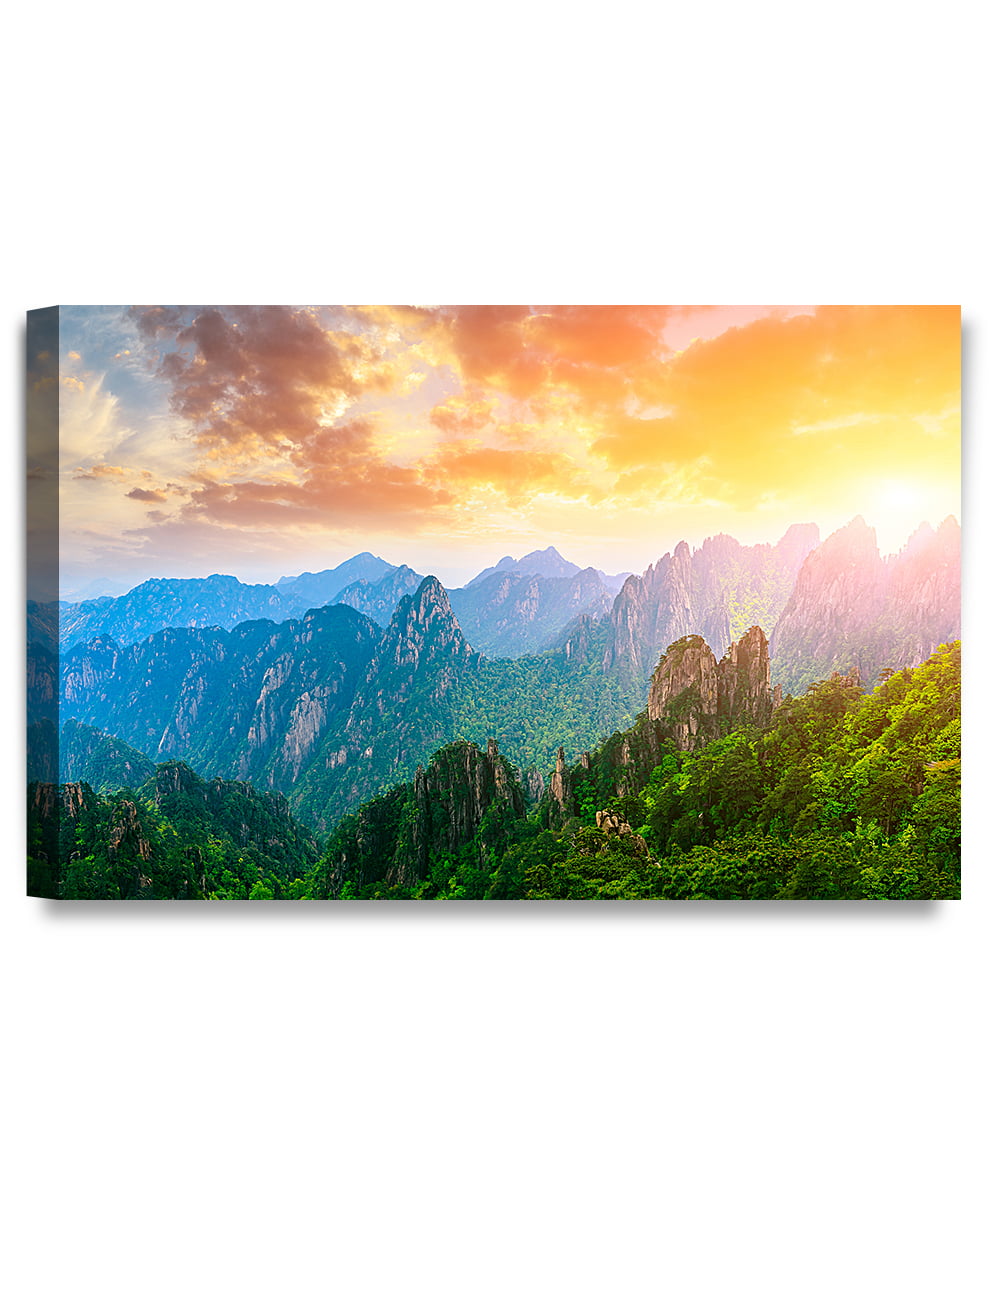 DecorArts HuangShan Mountain View. Giclee Canvas Prints for Wall Decor.  30x20